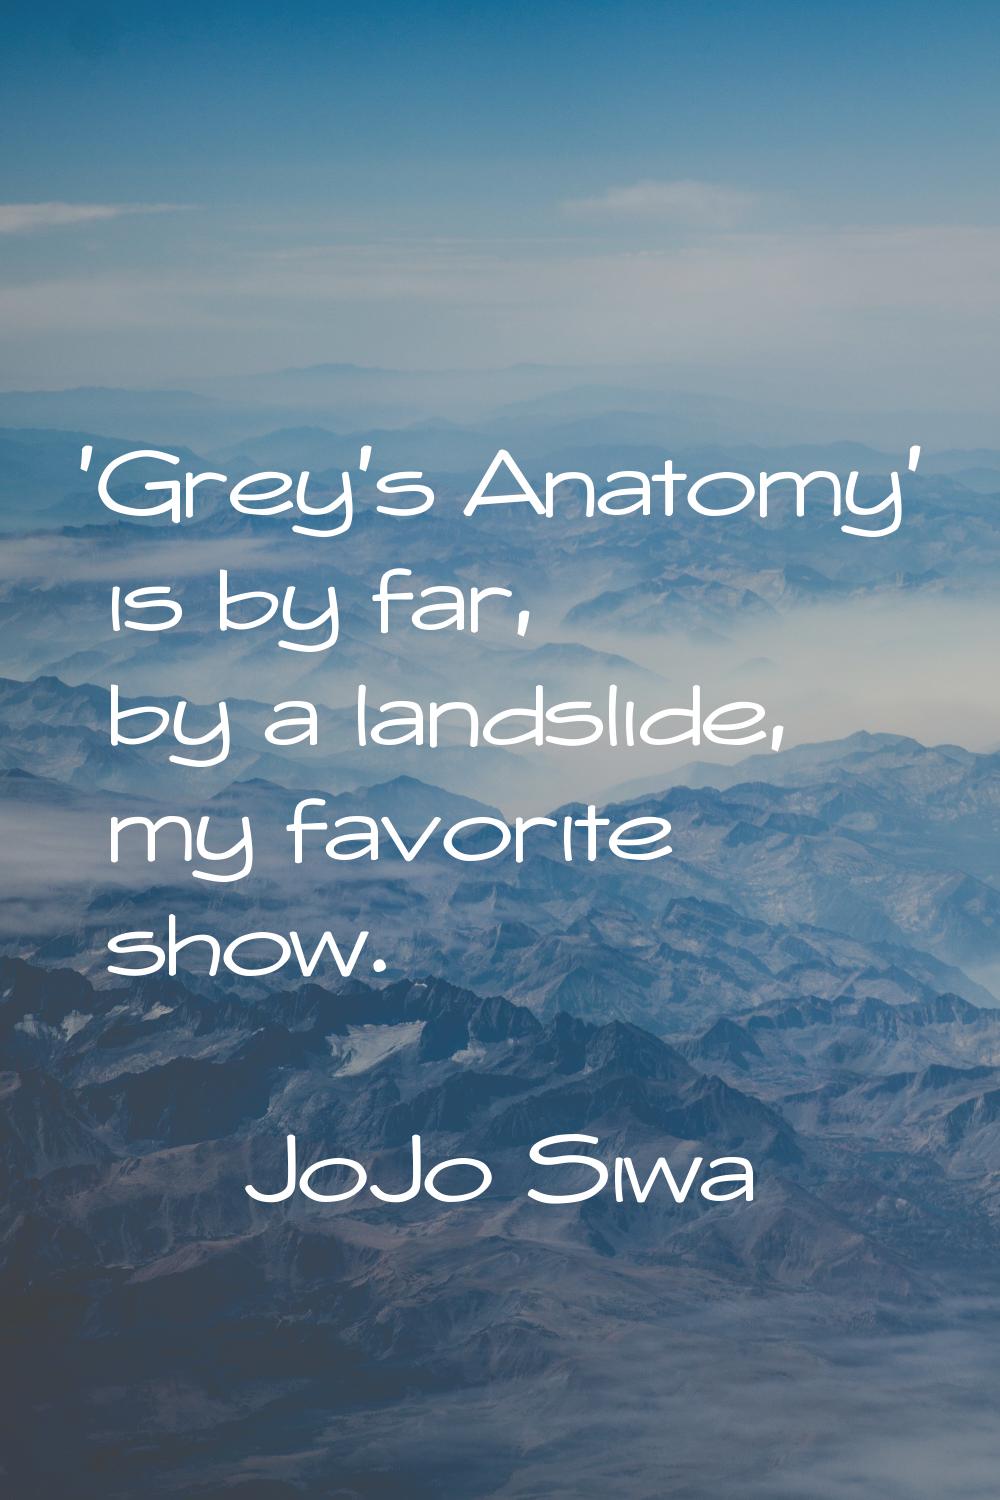 'Grey's Anatomy' is by far, by a landslide, my favorite show.